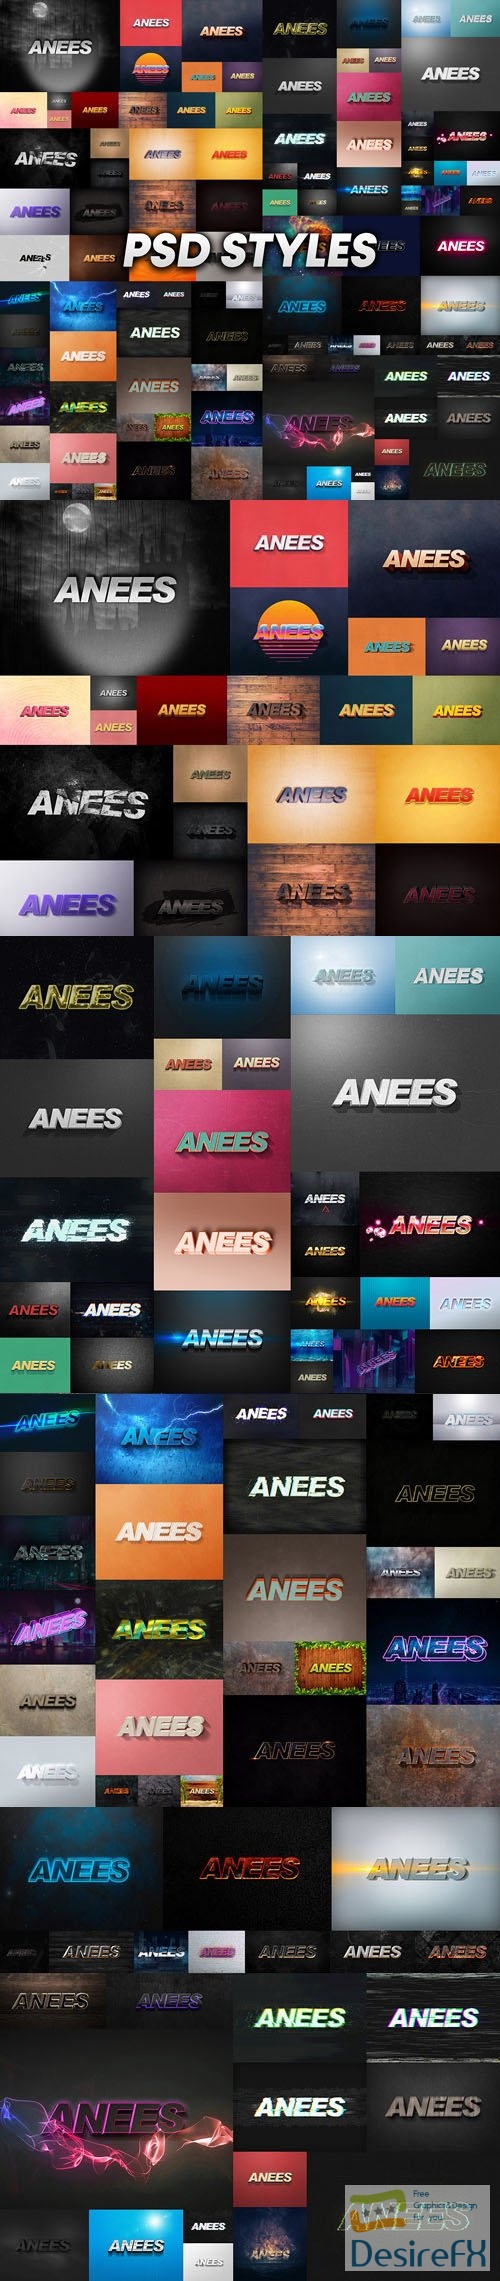 100+ Text Effects Bundle for Photoshop